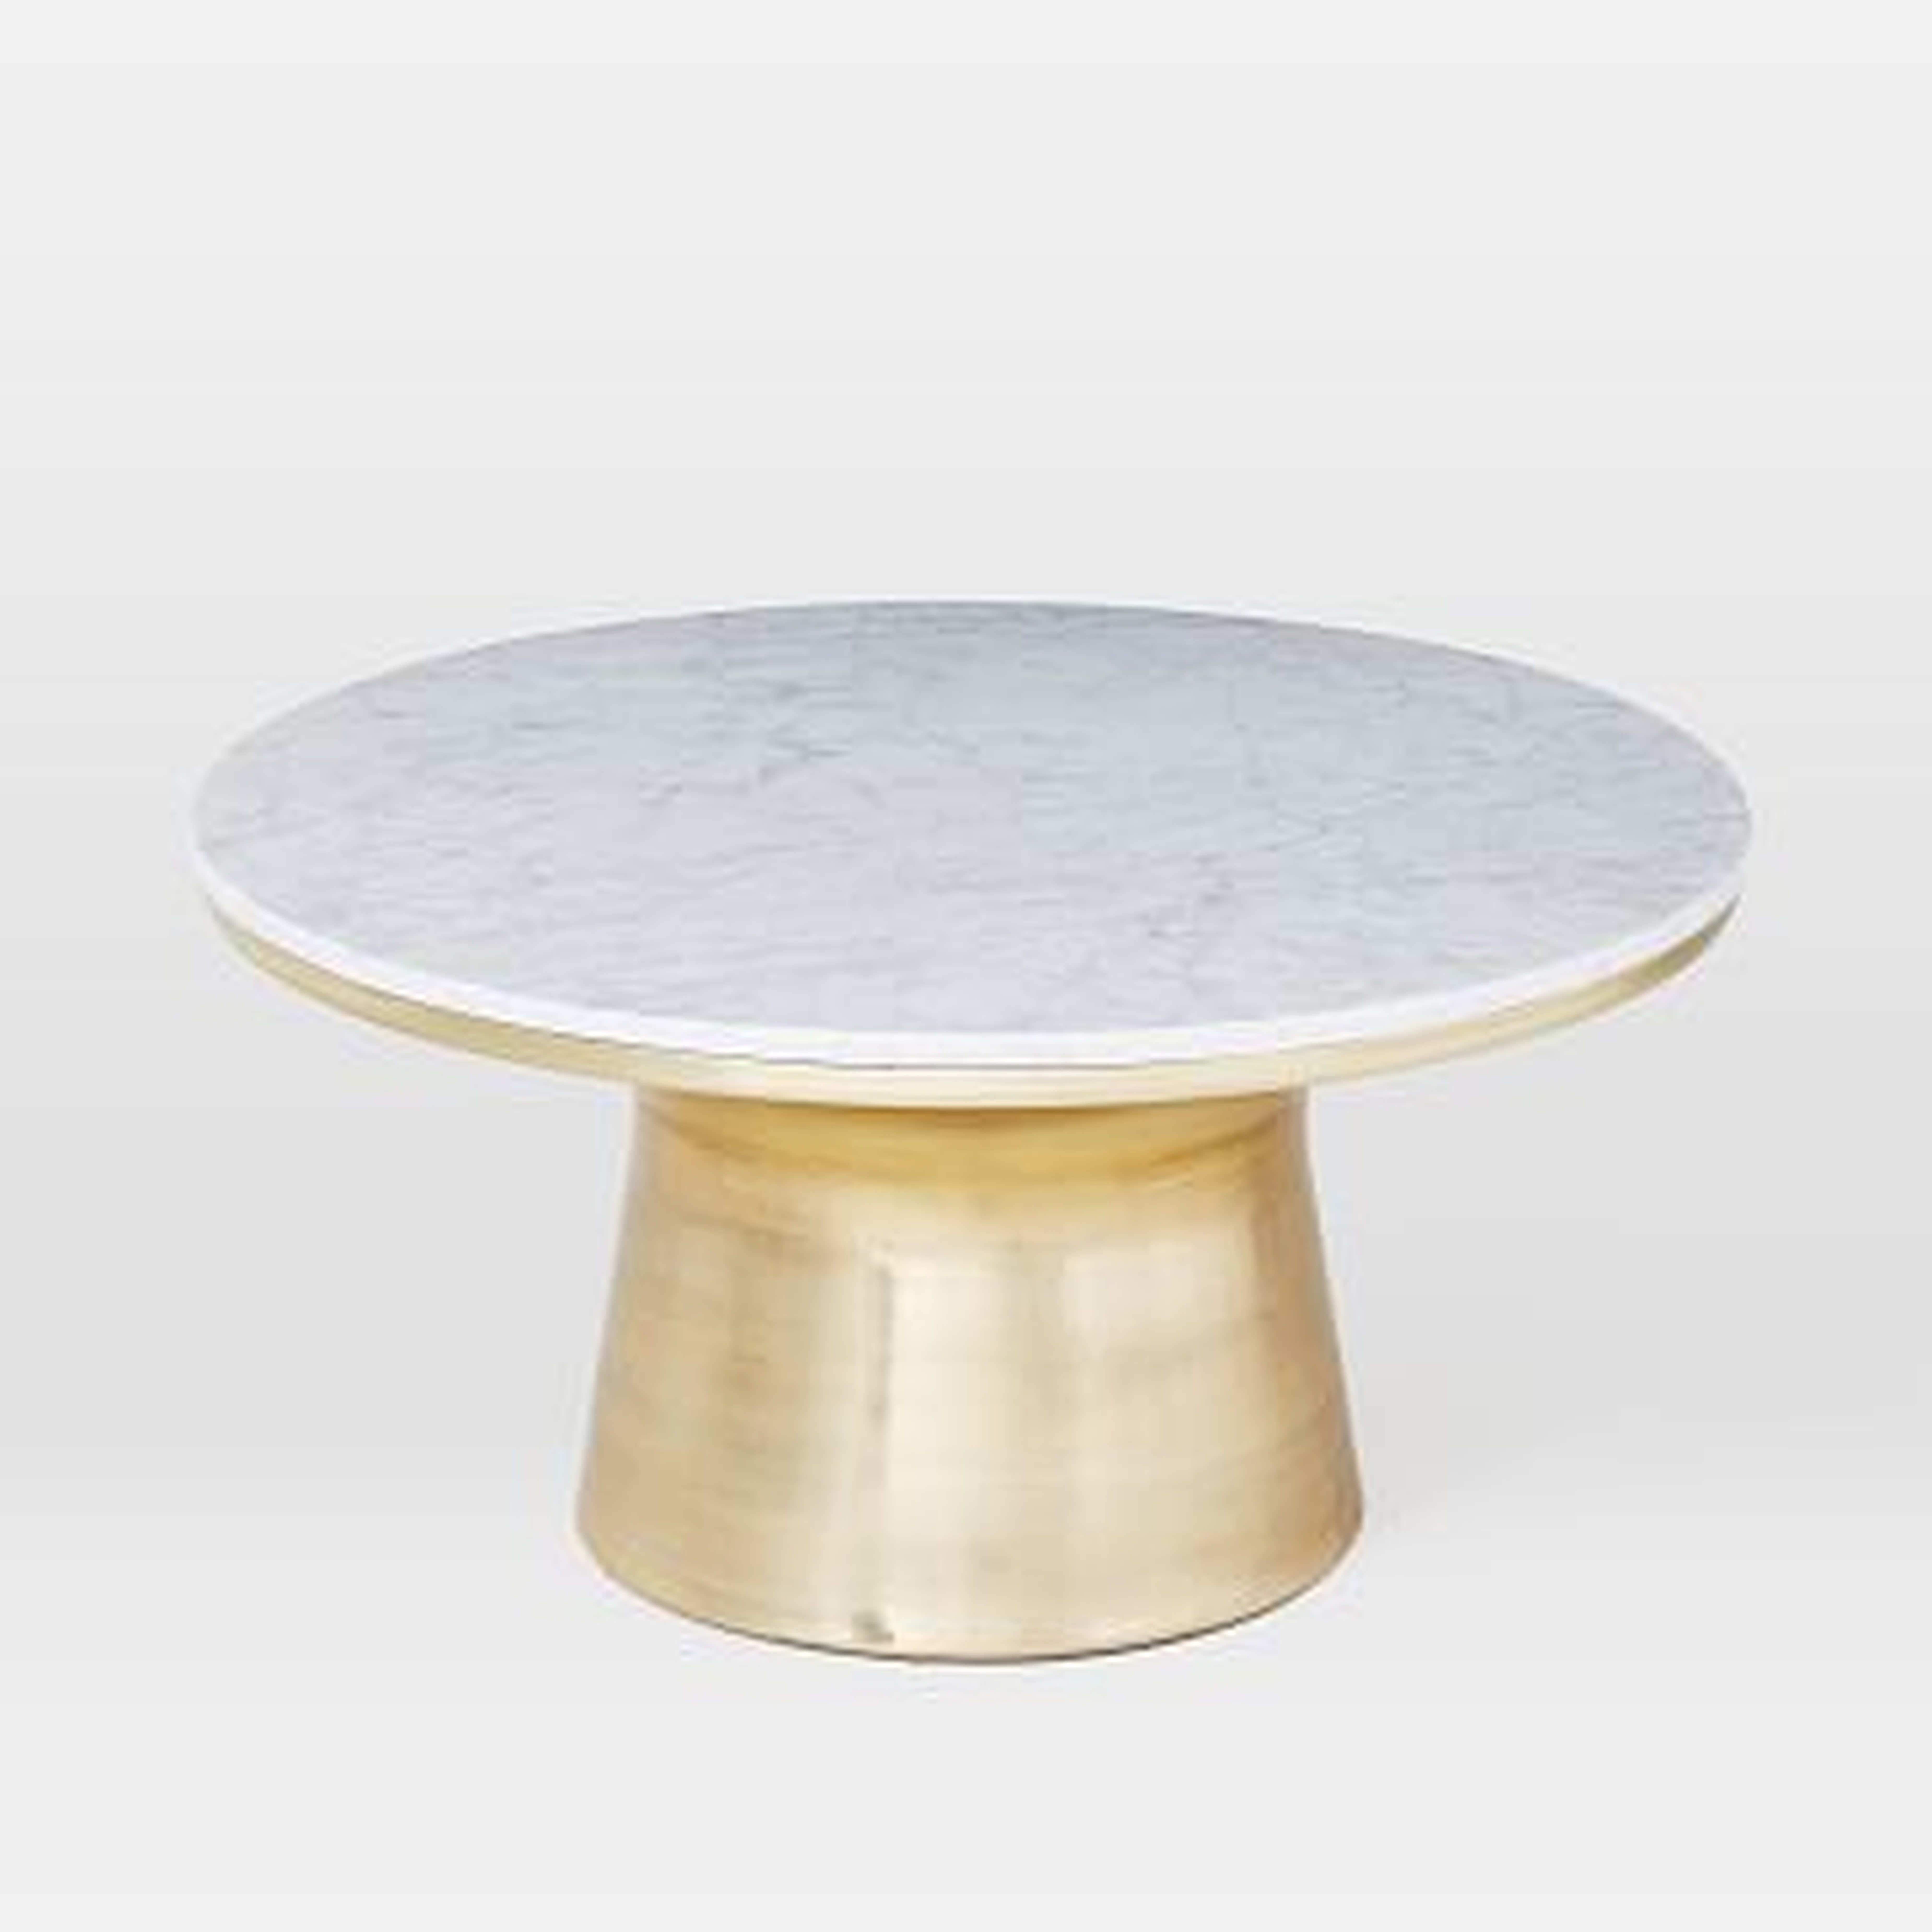 Marble Topped Pedestal Coffee Table, (30.5" Diam.), White Marble/Antique Brass Base - West Elm